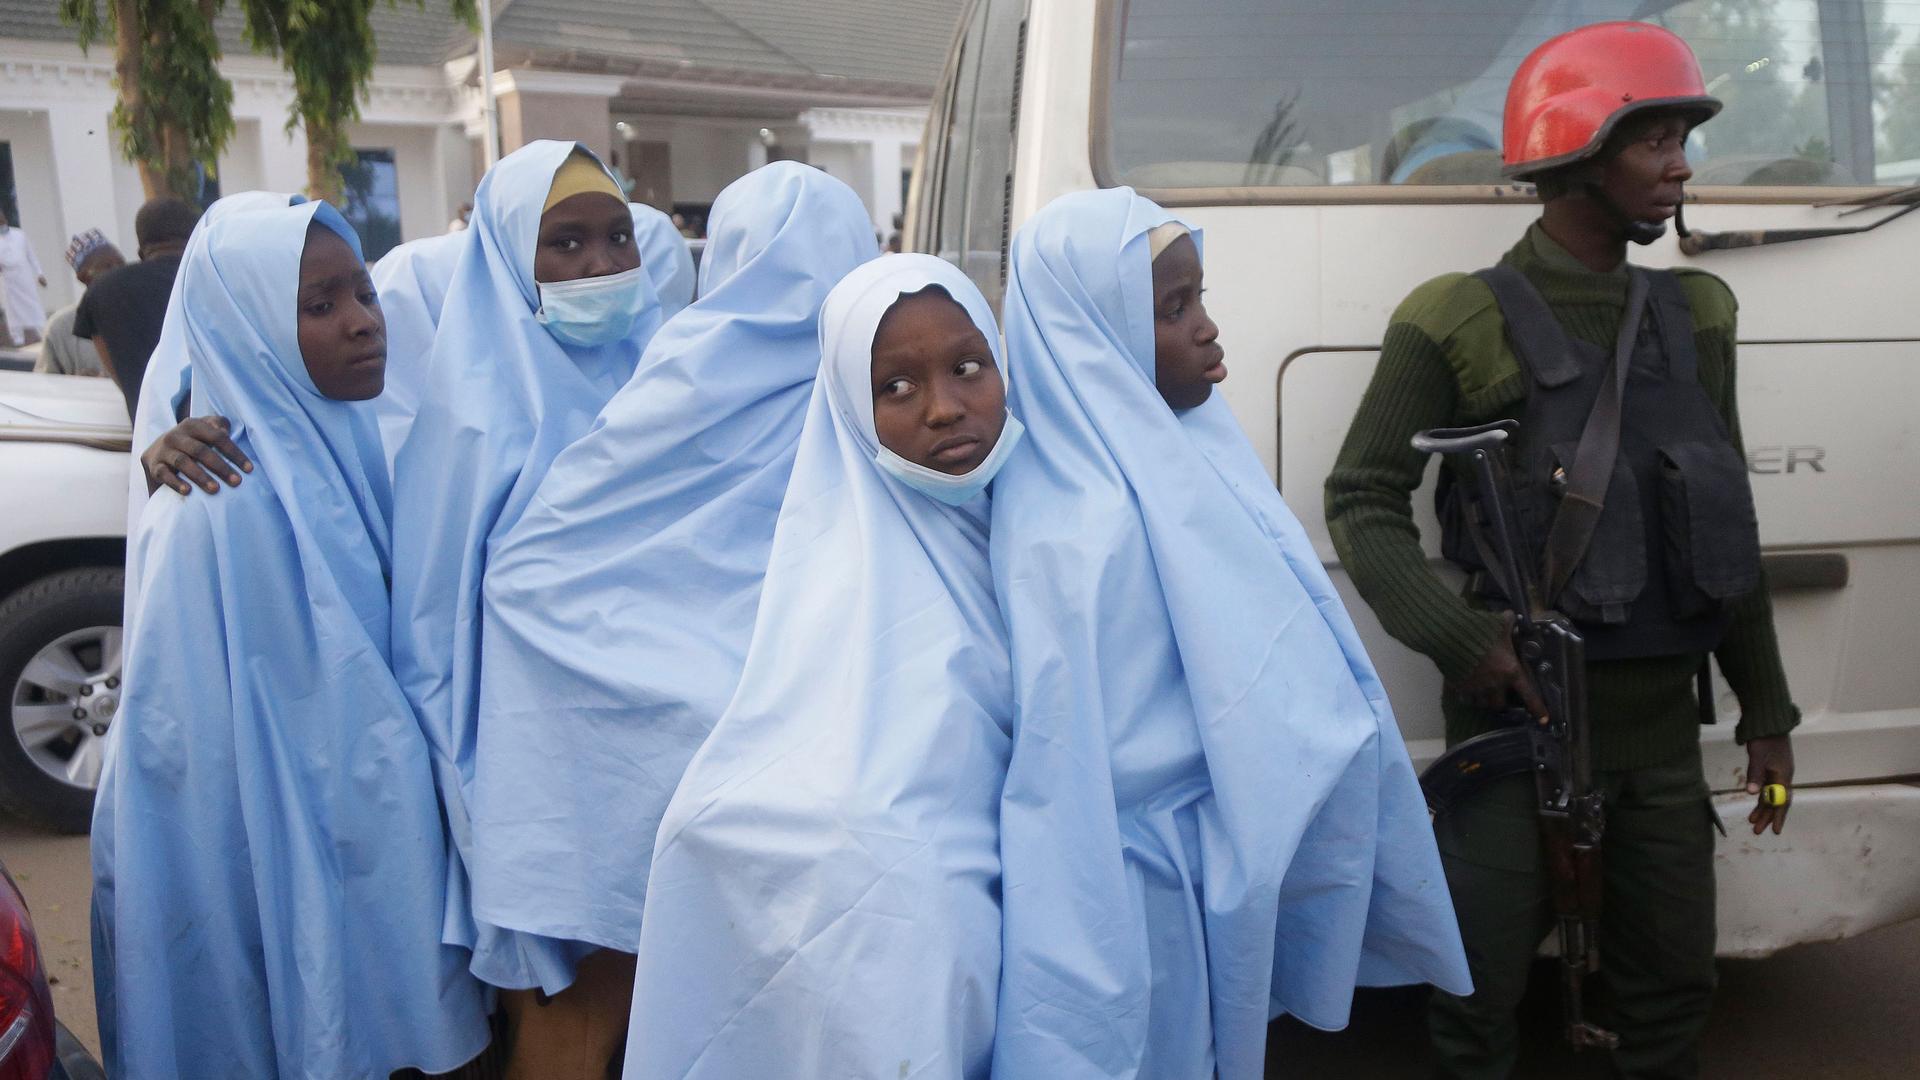 Several young school children are shown wearing blue traditional Muslim coverning with a security official hearing a red helmet standing by. 